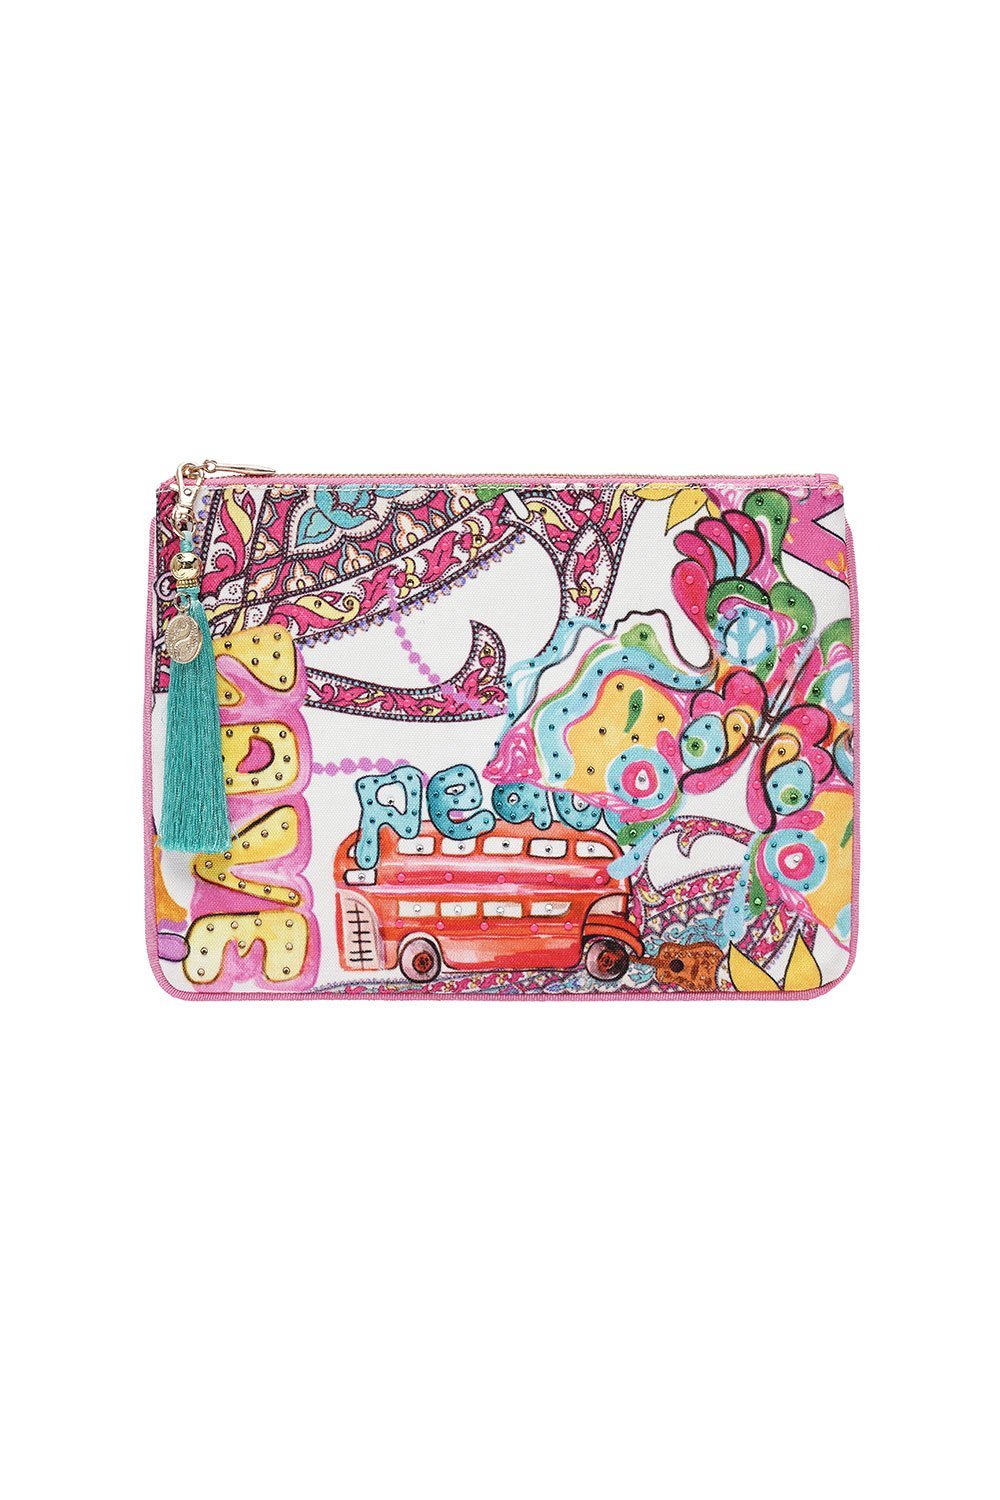 SMALL CANVAS CLUTCH LET THE SUN SHINE